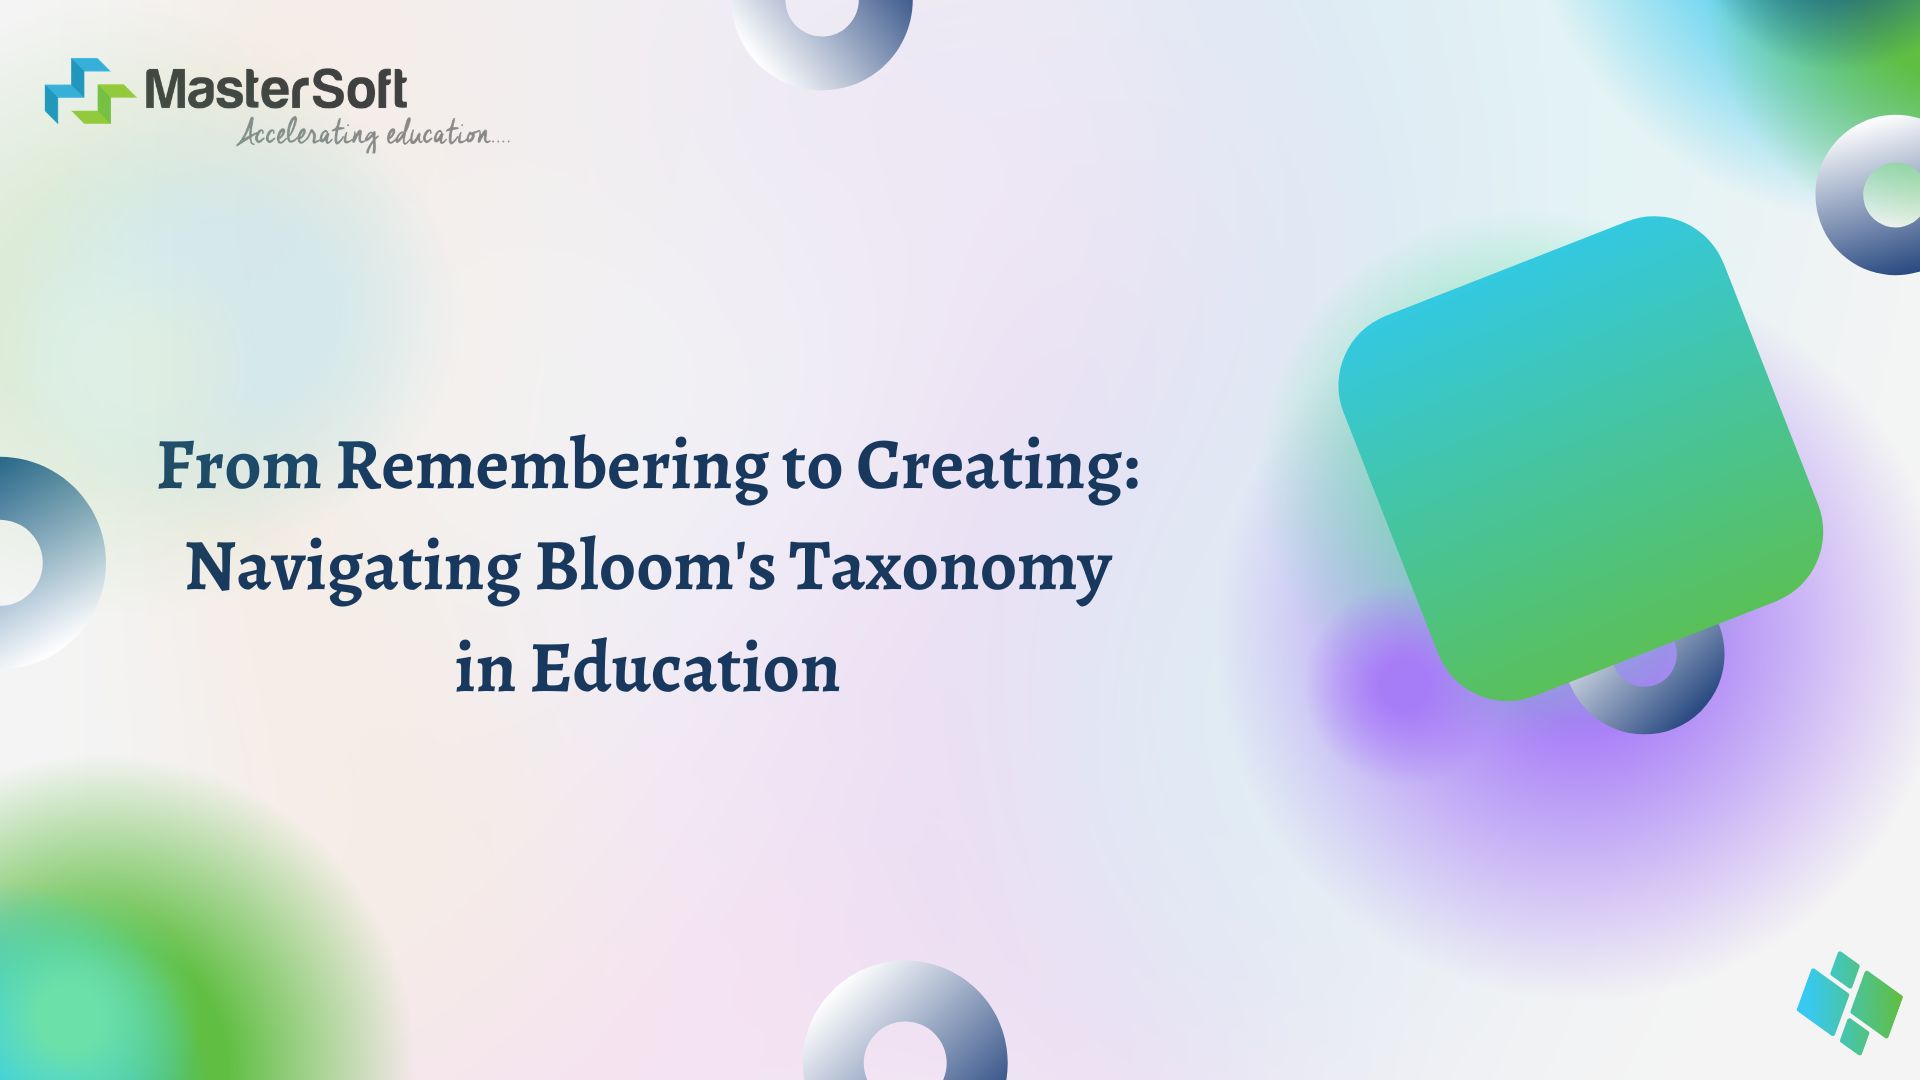 From Remembering to Creating: Navigating Bloom’s Taxonomy in Education